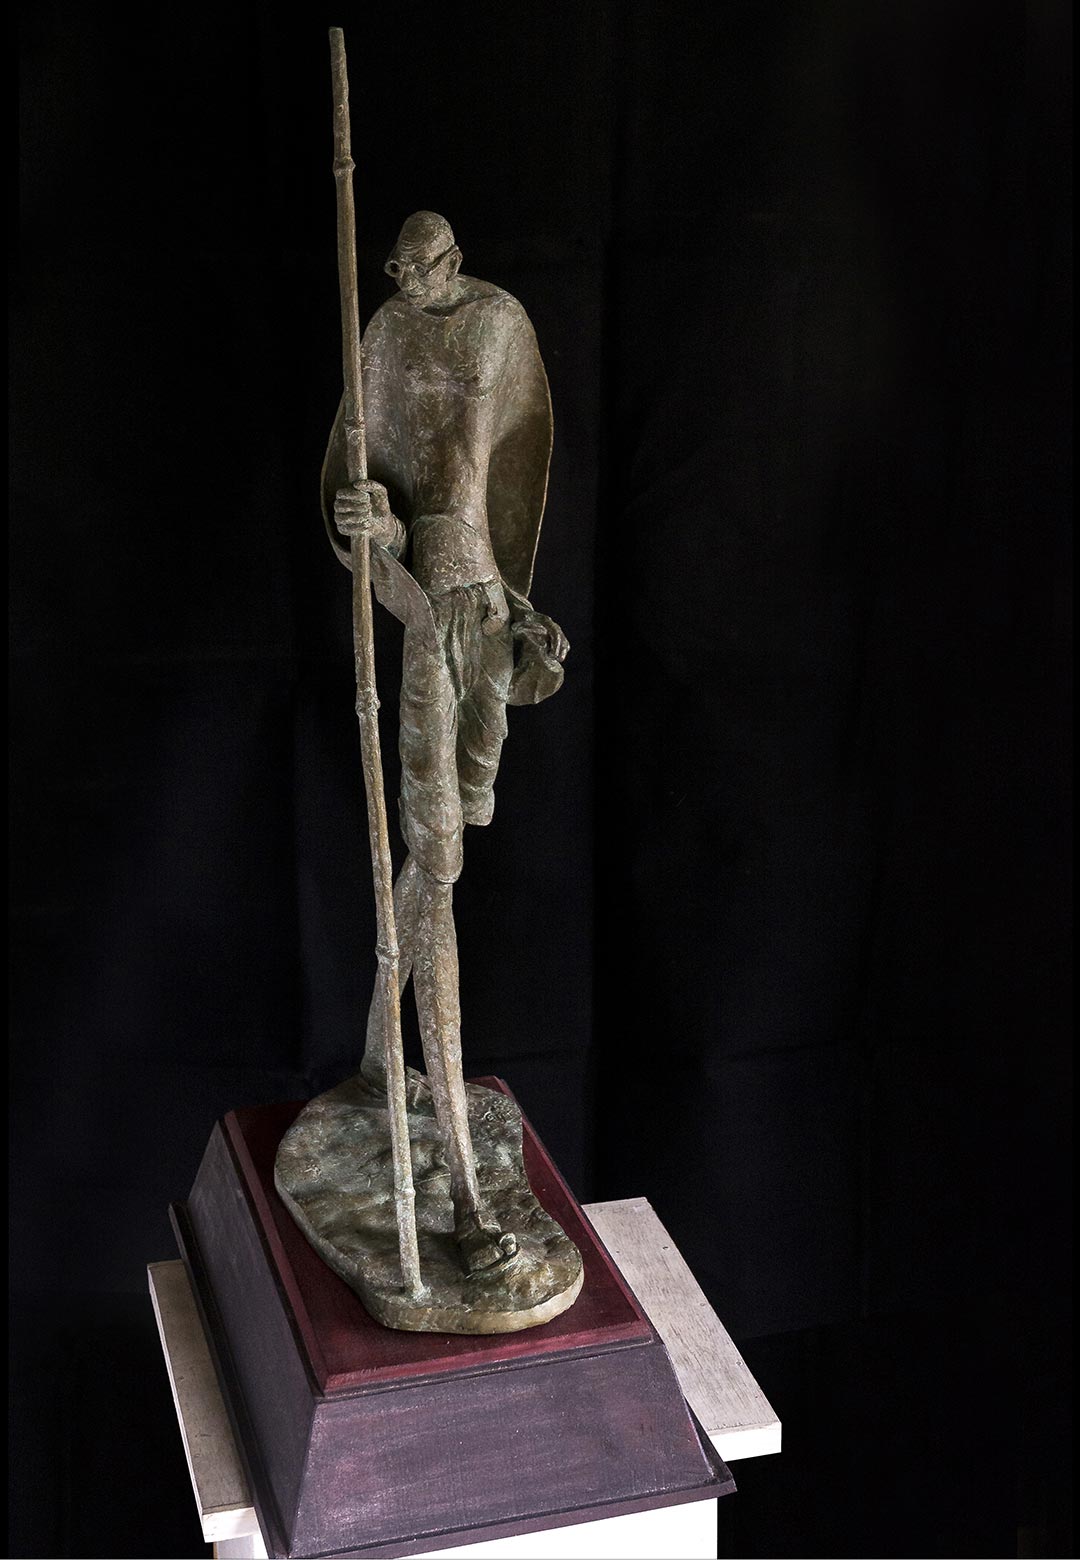 Figurative Sculpture with Bronze"Our Leader" art by Prabir Roy